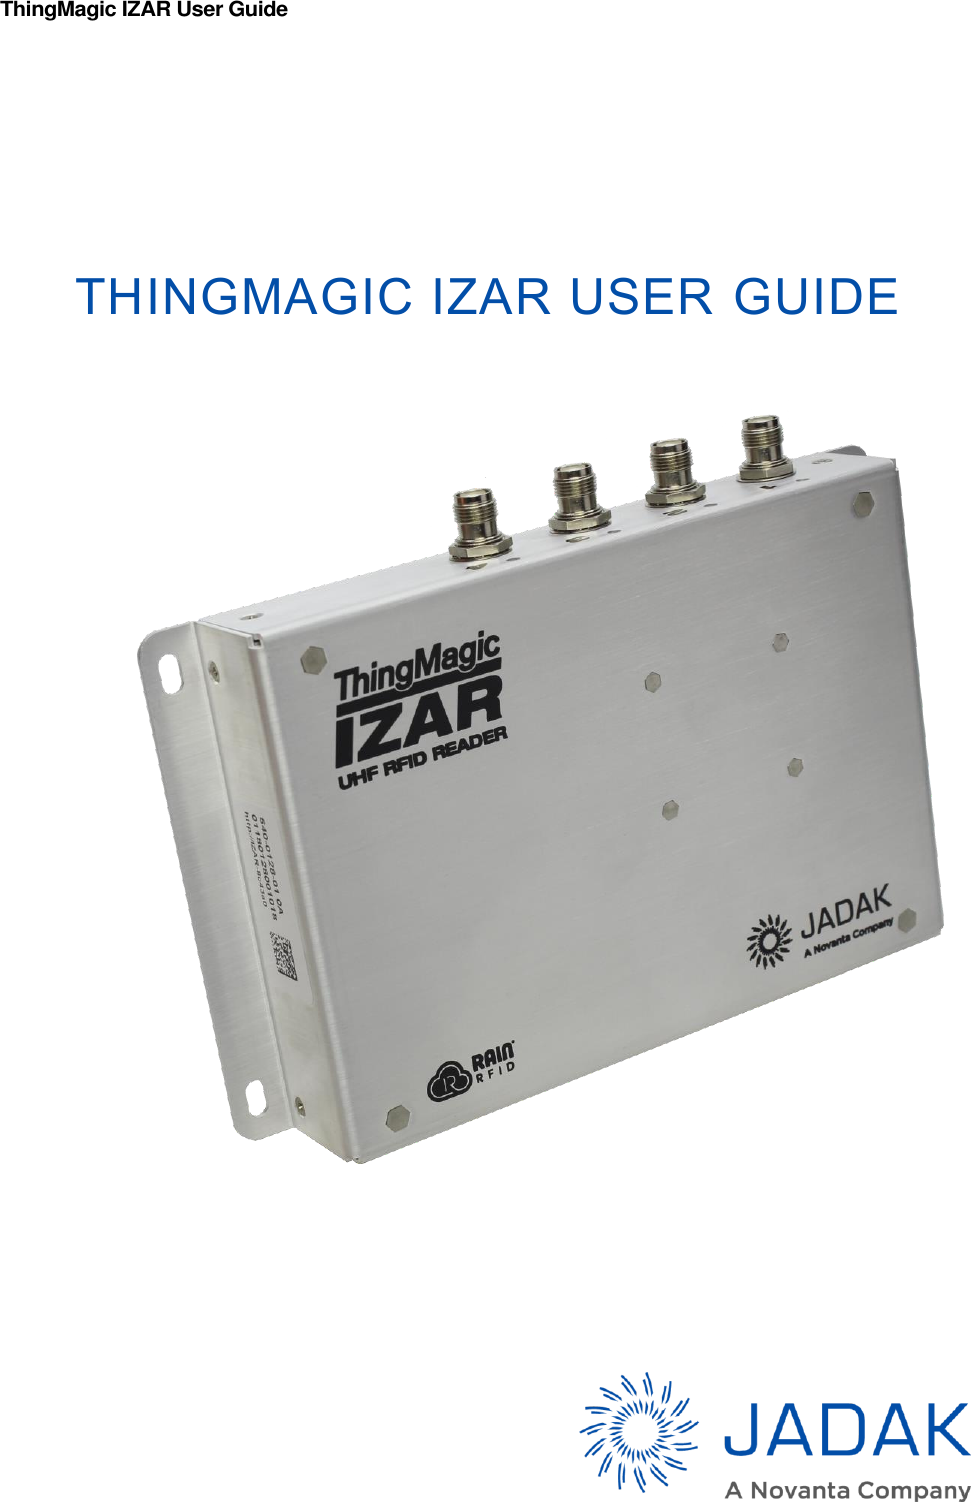 ThingMagic IZAR User Guide       THINGMAGIC IZAR USER GUIDE    For Firmware version 5.3.0 and later 